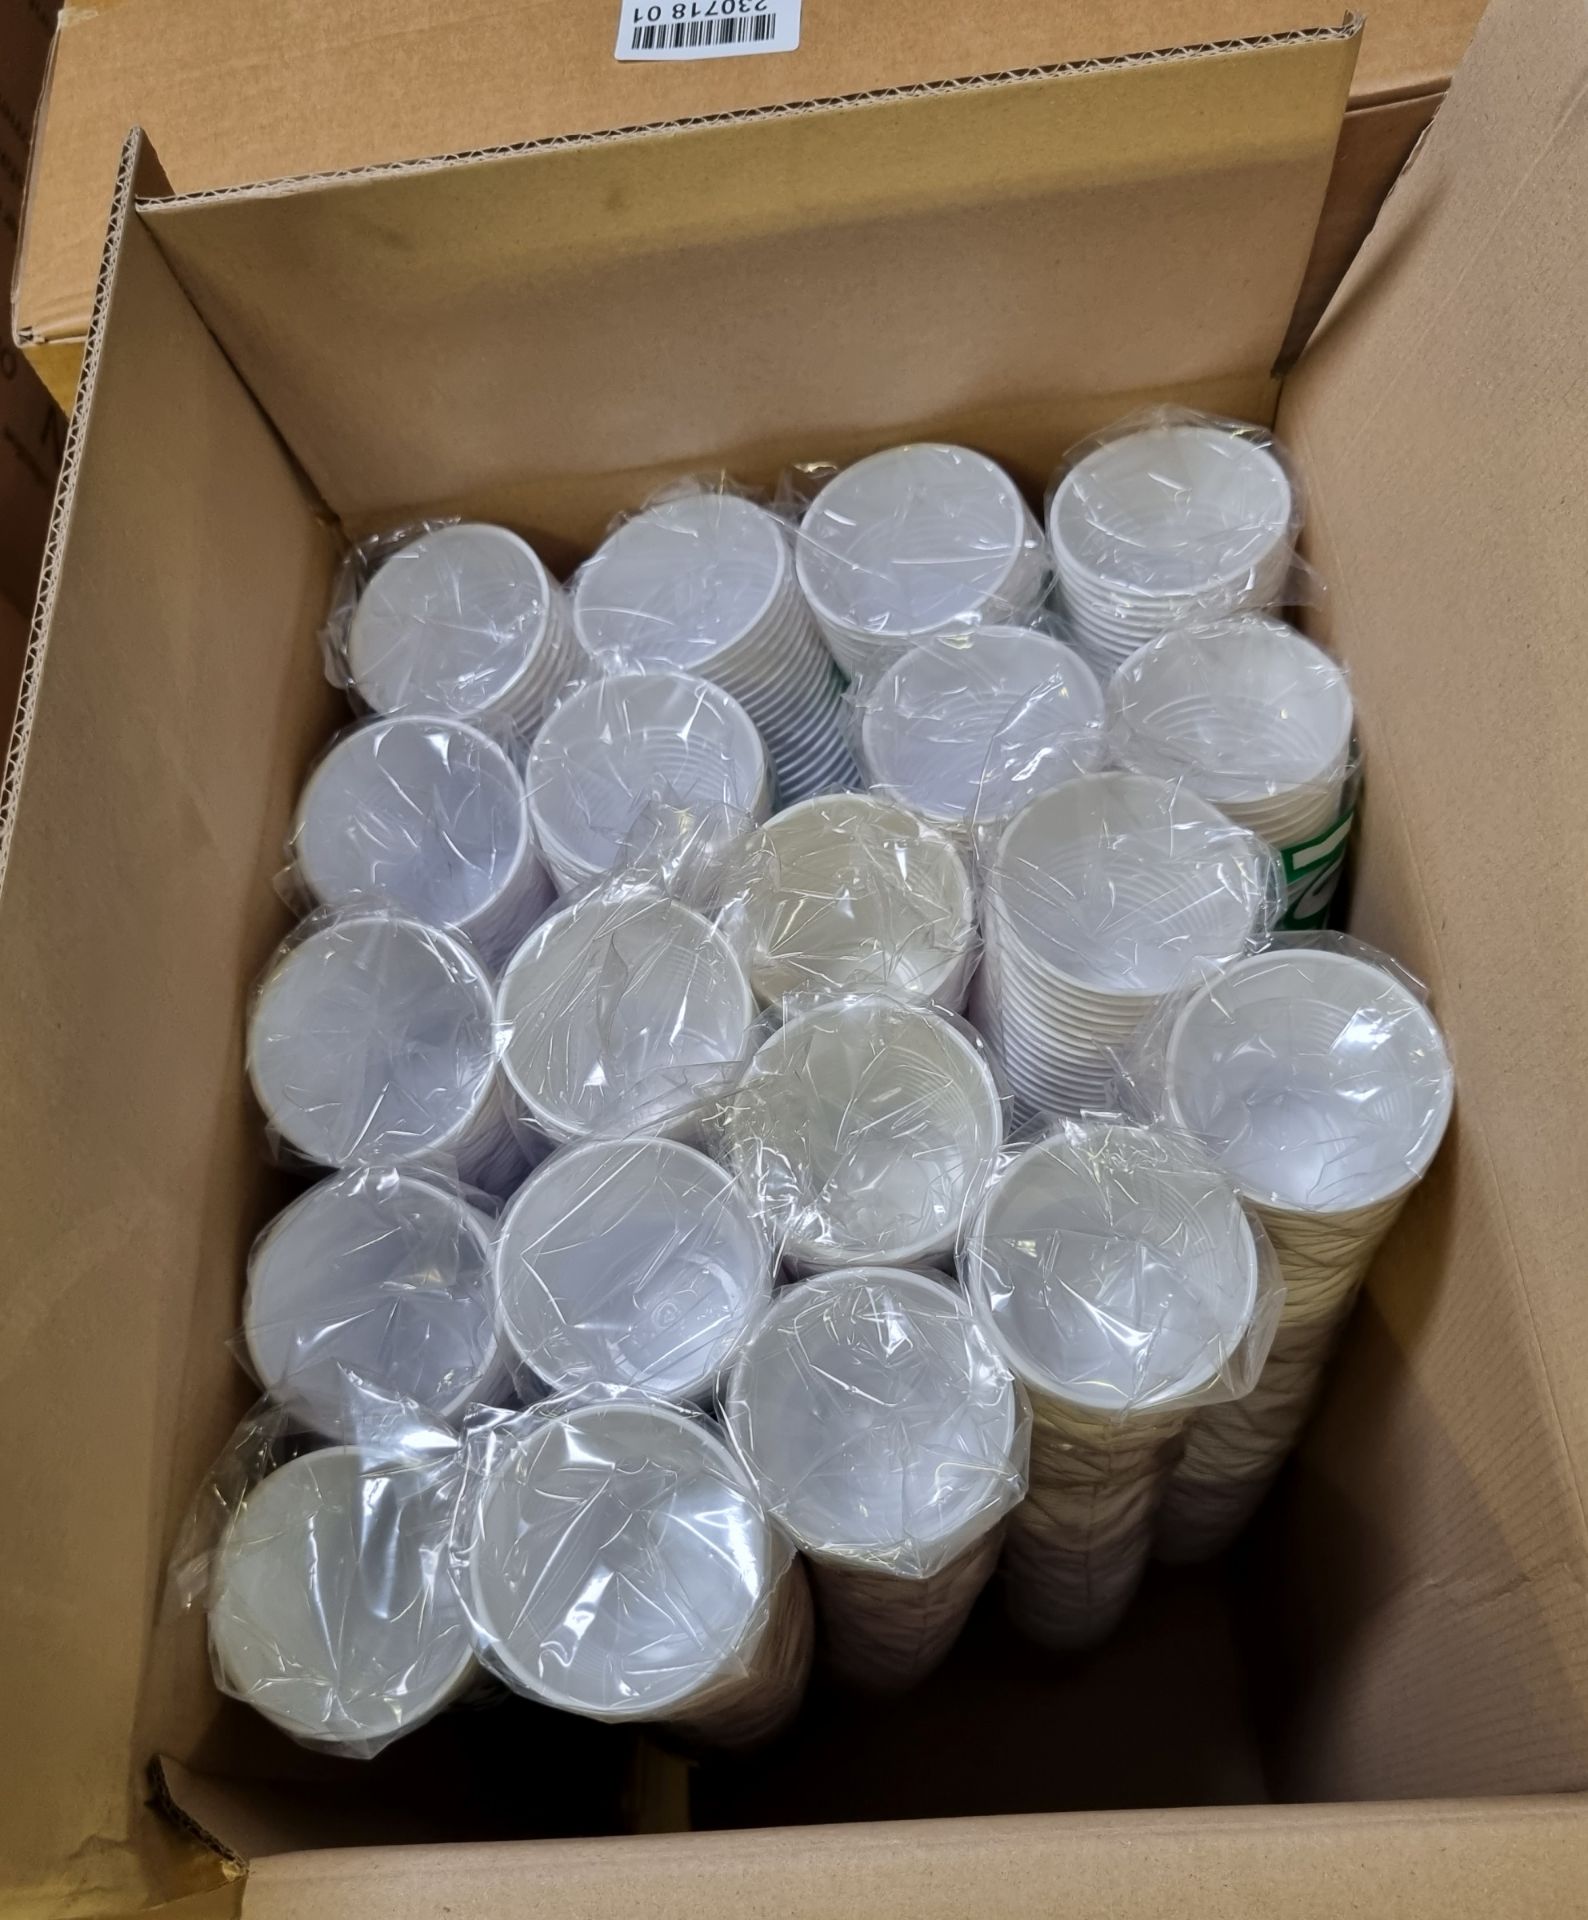 12x boxes of 7 zo tall white vending cups - 20x100 cups per box